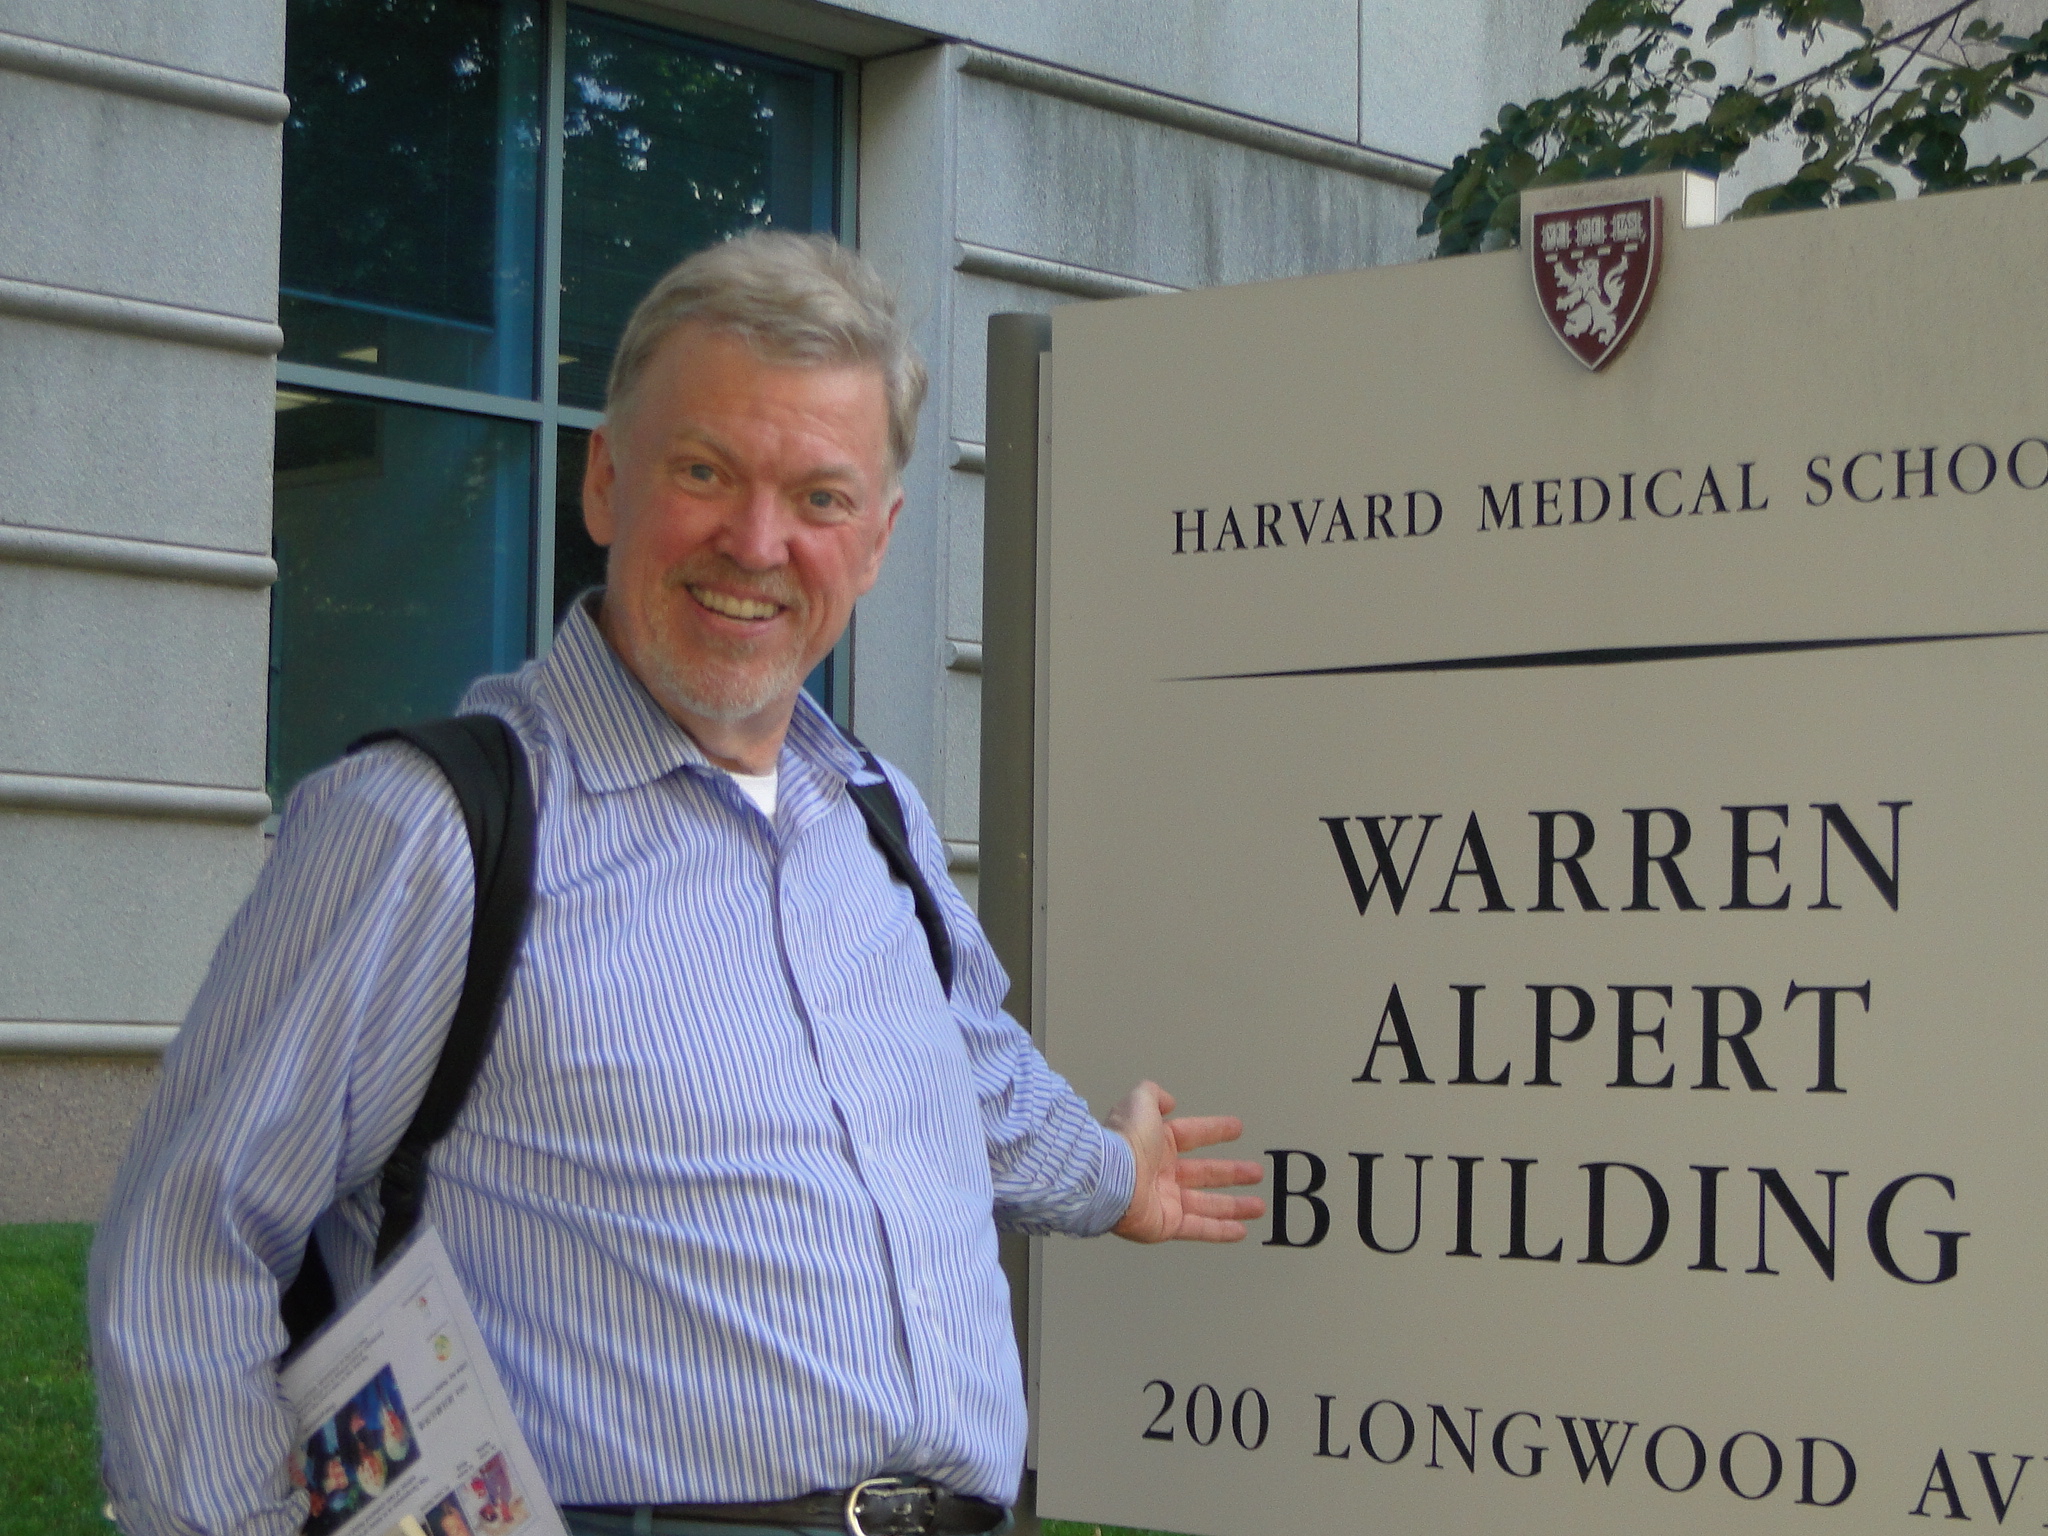 Maynard S. Clark by sign for Warren Alpert Building at Harvard Medical School; he was involved in some of the fundraising effort